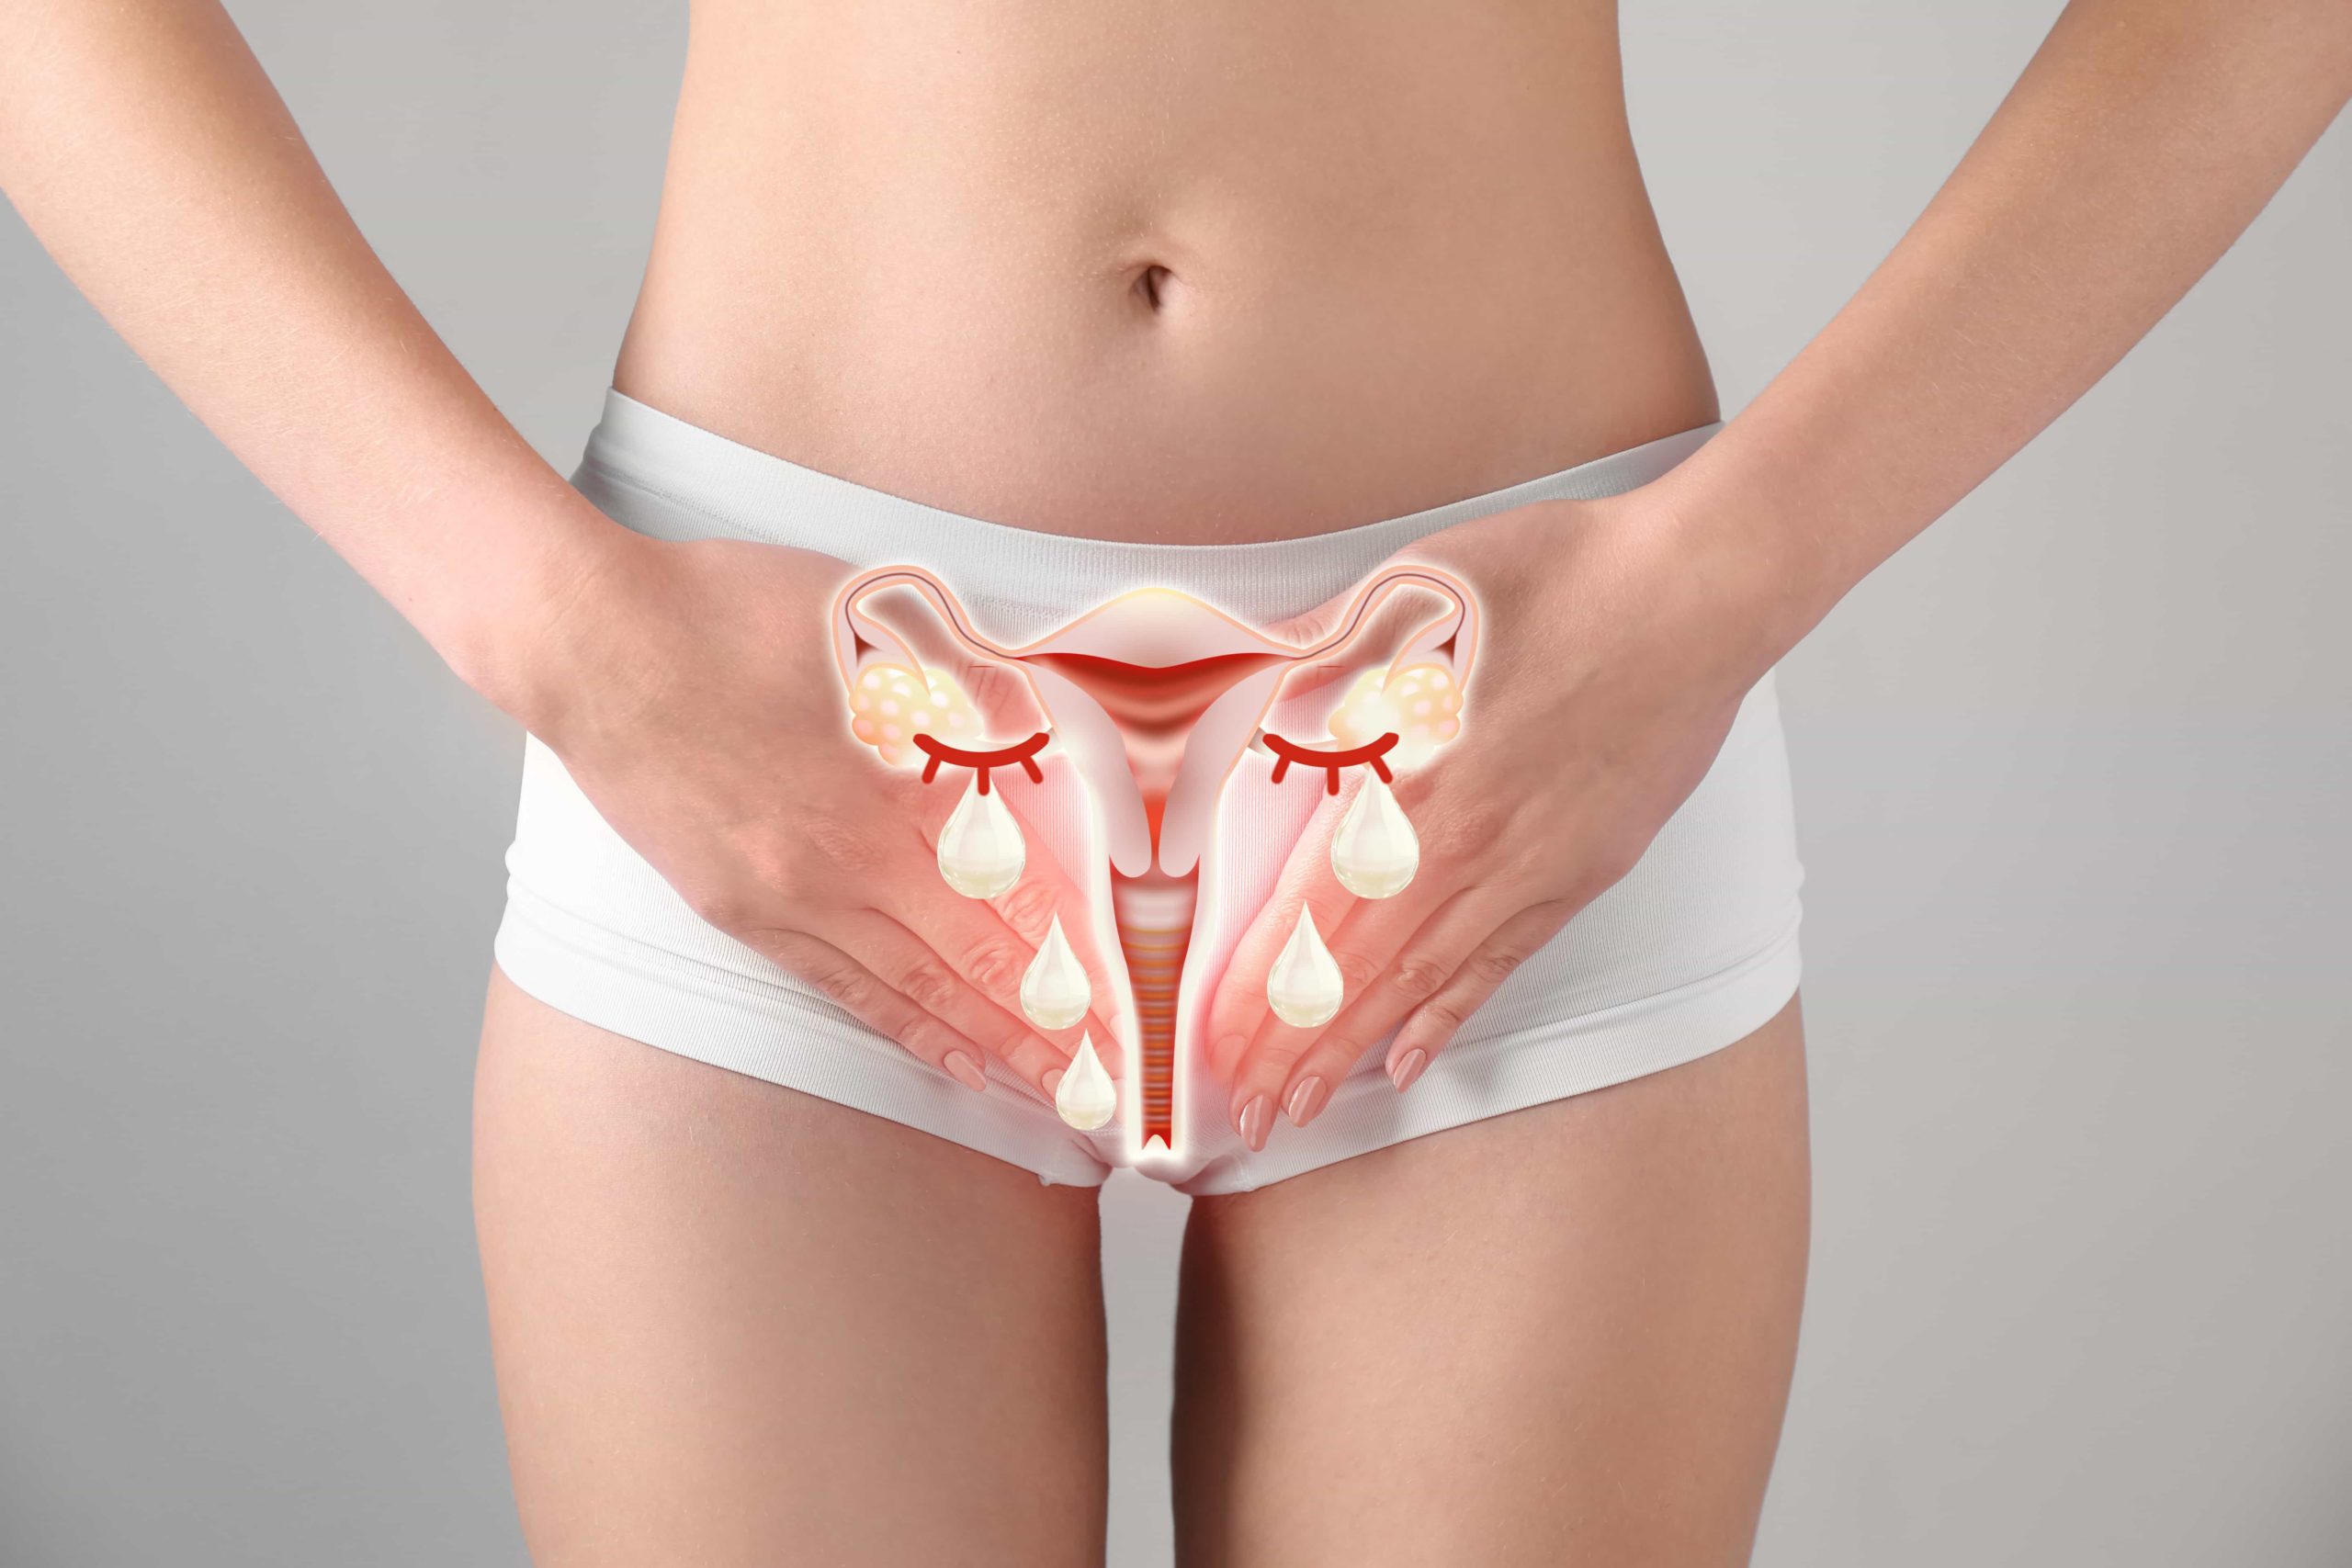 The photo of uterus is on the woman's body, isolate on white background, female anatomy concept - Discover the transformative options available for Female Vaginal Rejuvenation and renew your confidence. Reclaim your sensuality with our expert guide | Female Vaginal Rejuvenation | Ella Esthetics in Alexandria, VA